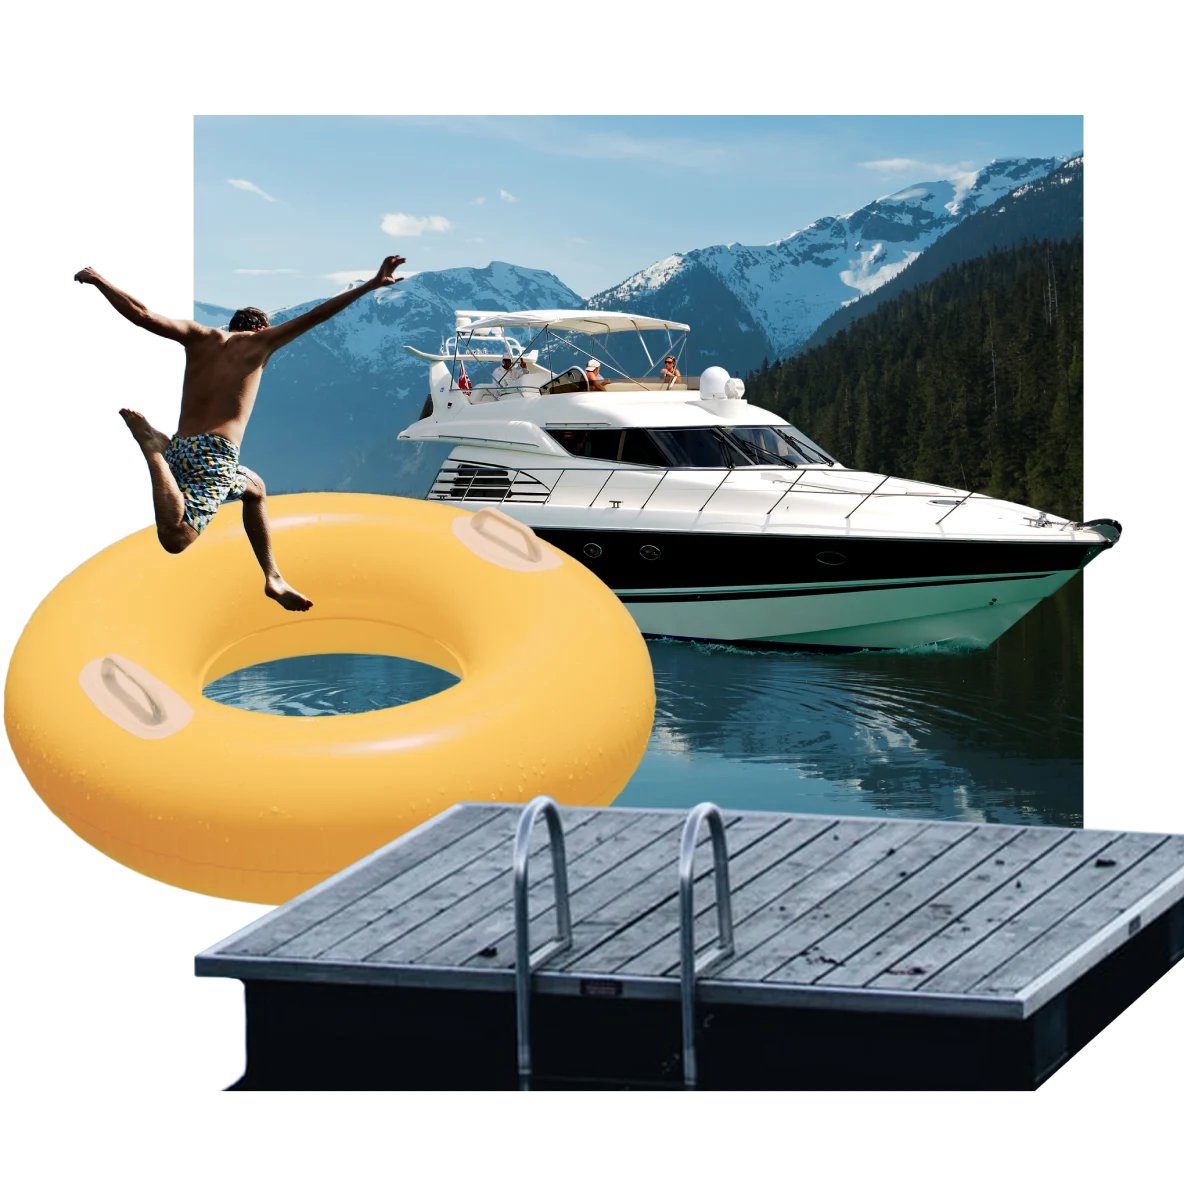 Collage of lake-themed items: A boat in the centre on a steel-blue lake with a dock in the foreground. A swimmer jumps inside a large yellow rubber ring. Snow-capped mountains in the background.